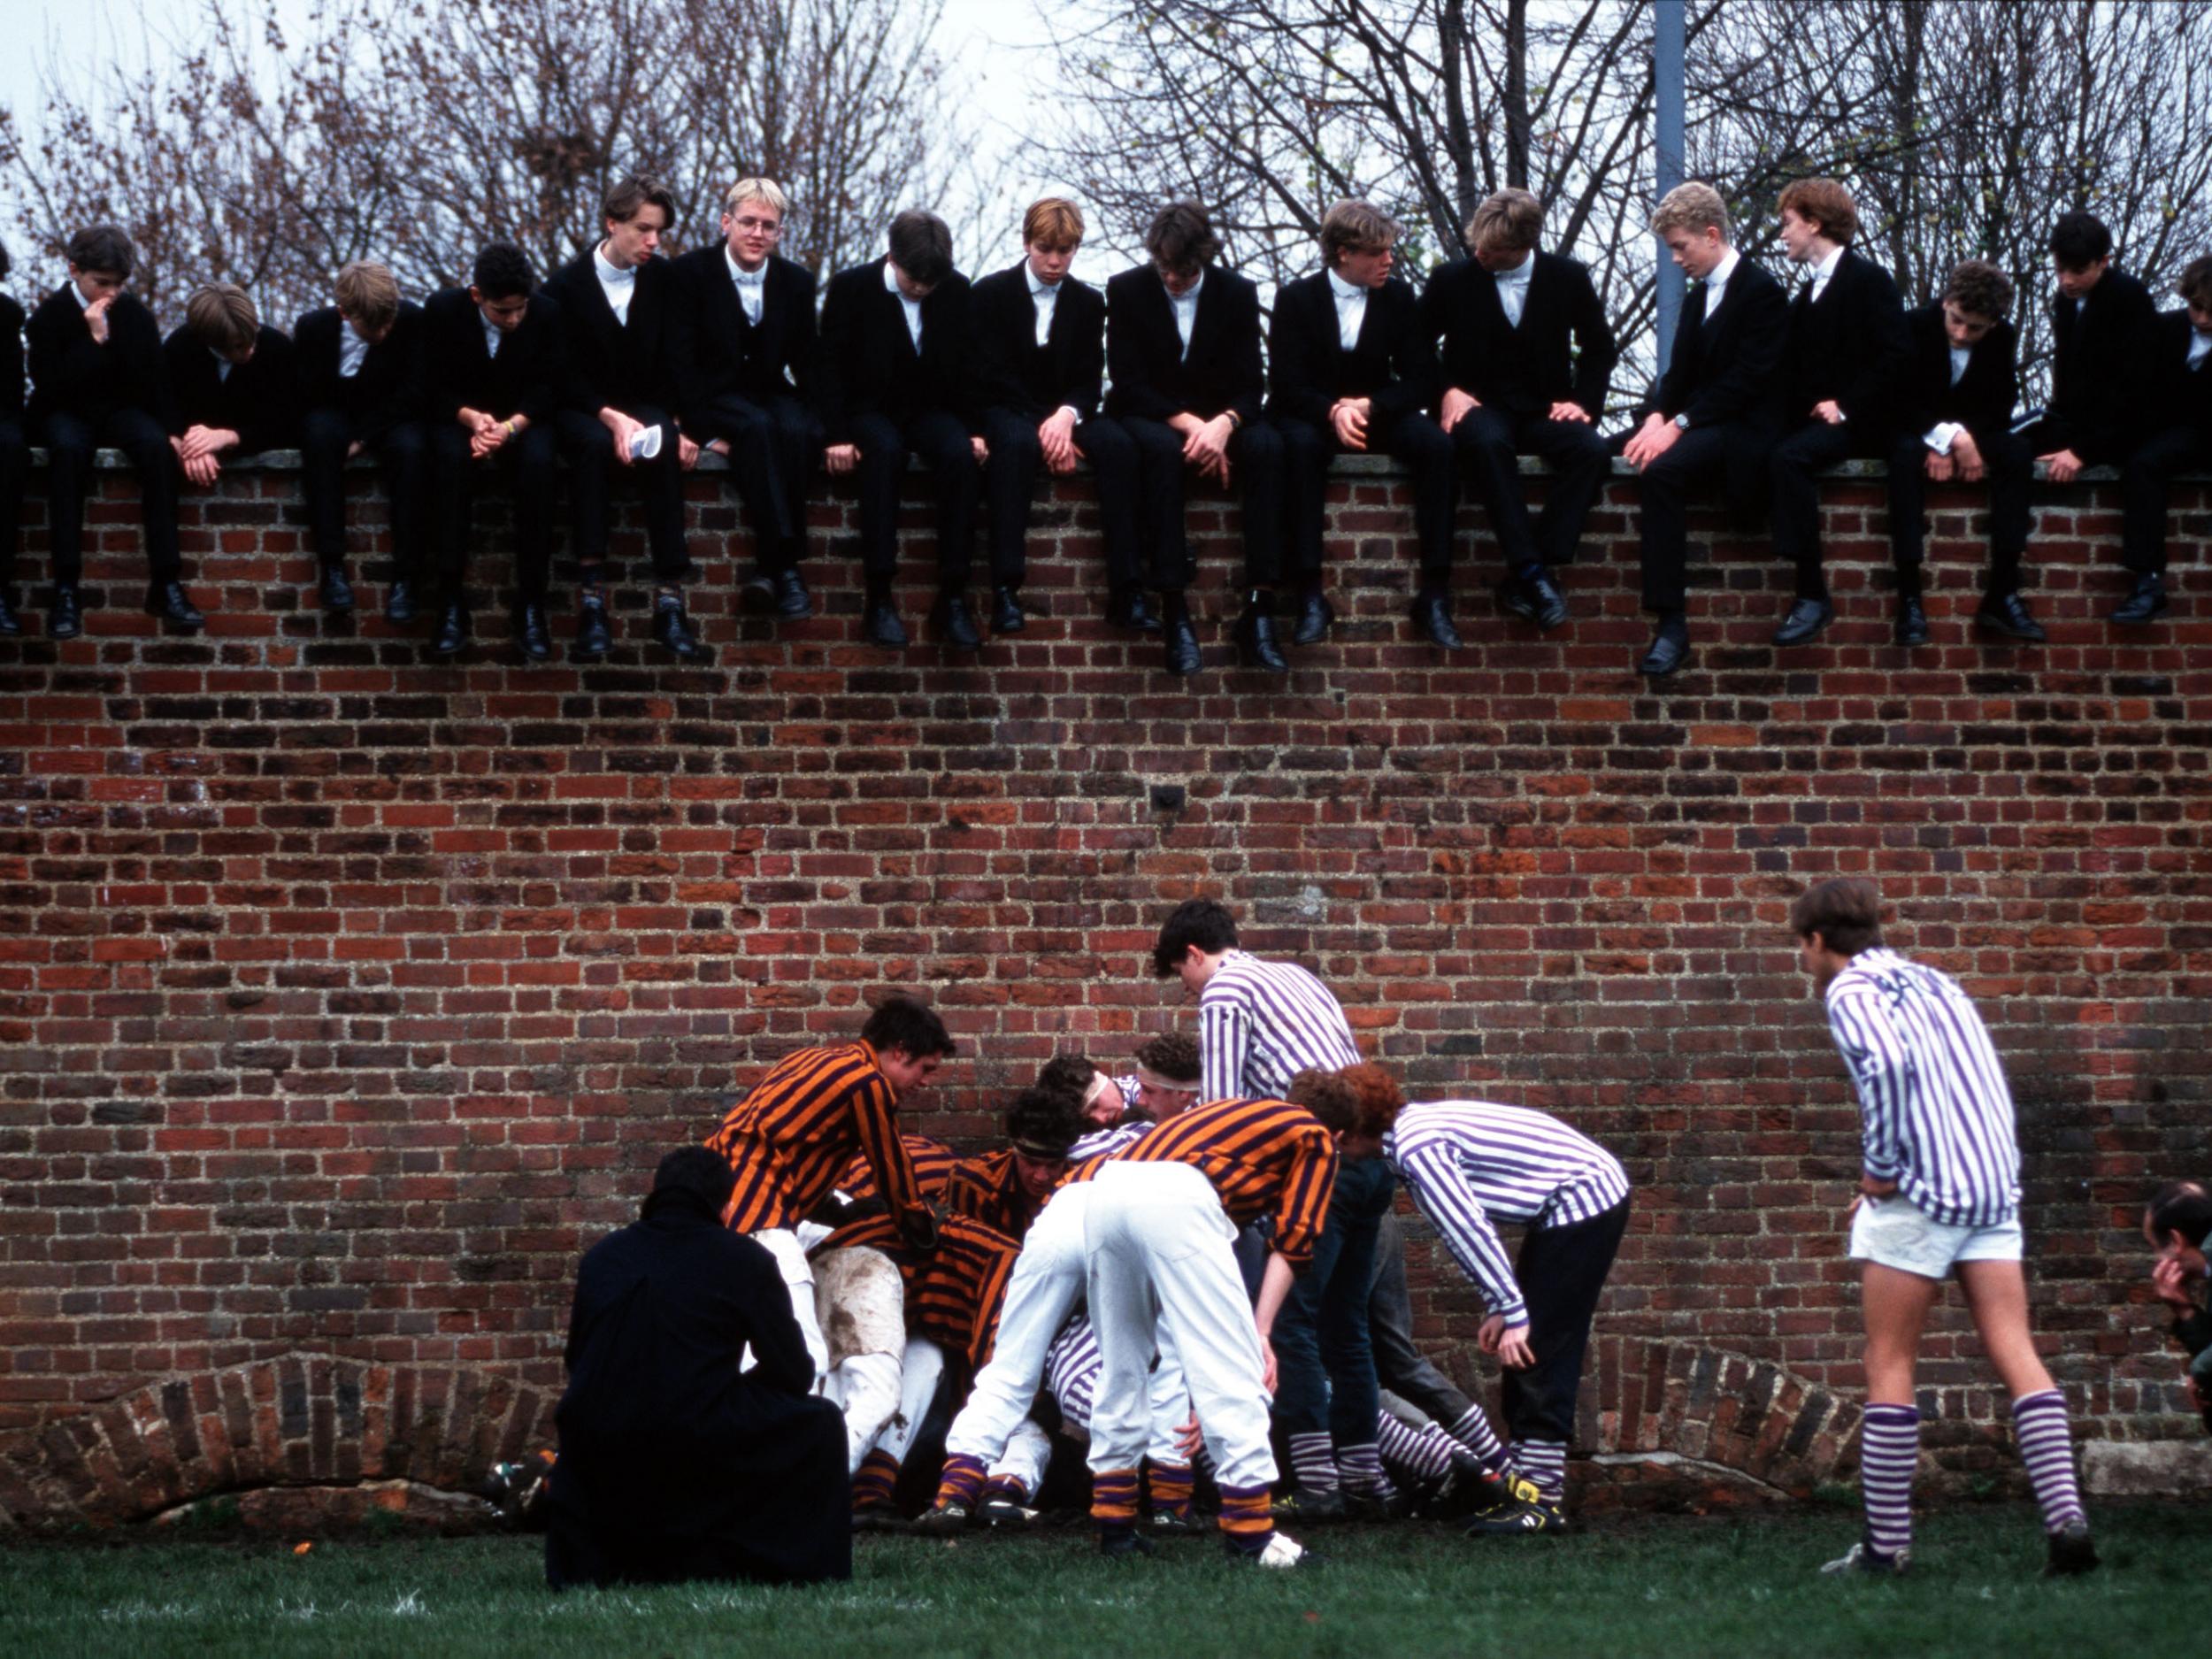 Public school boys are pictured playing the traditional Eton Wall Game.